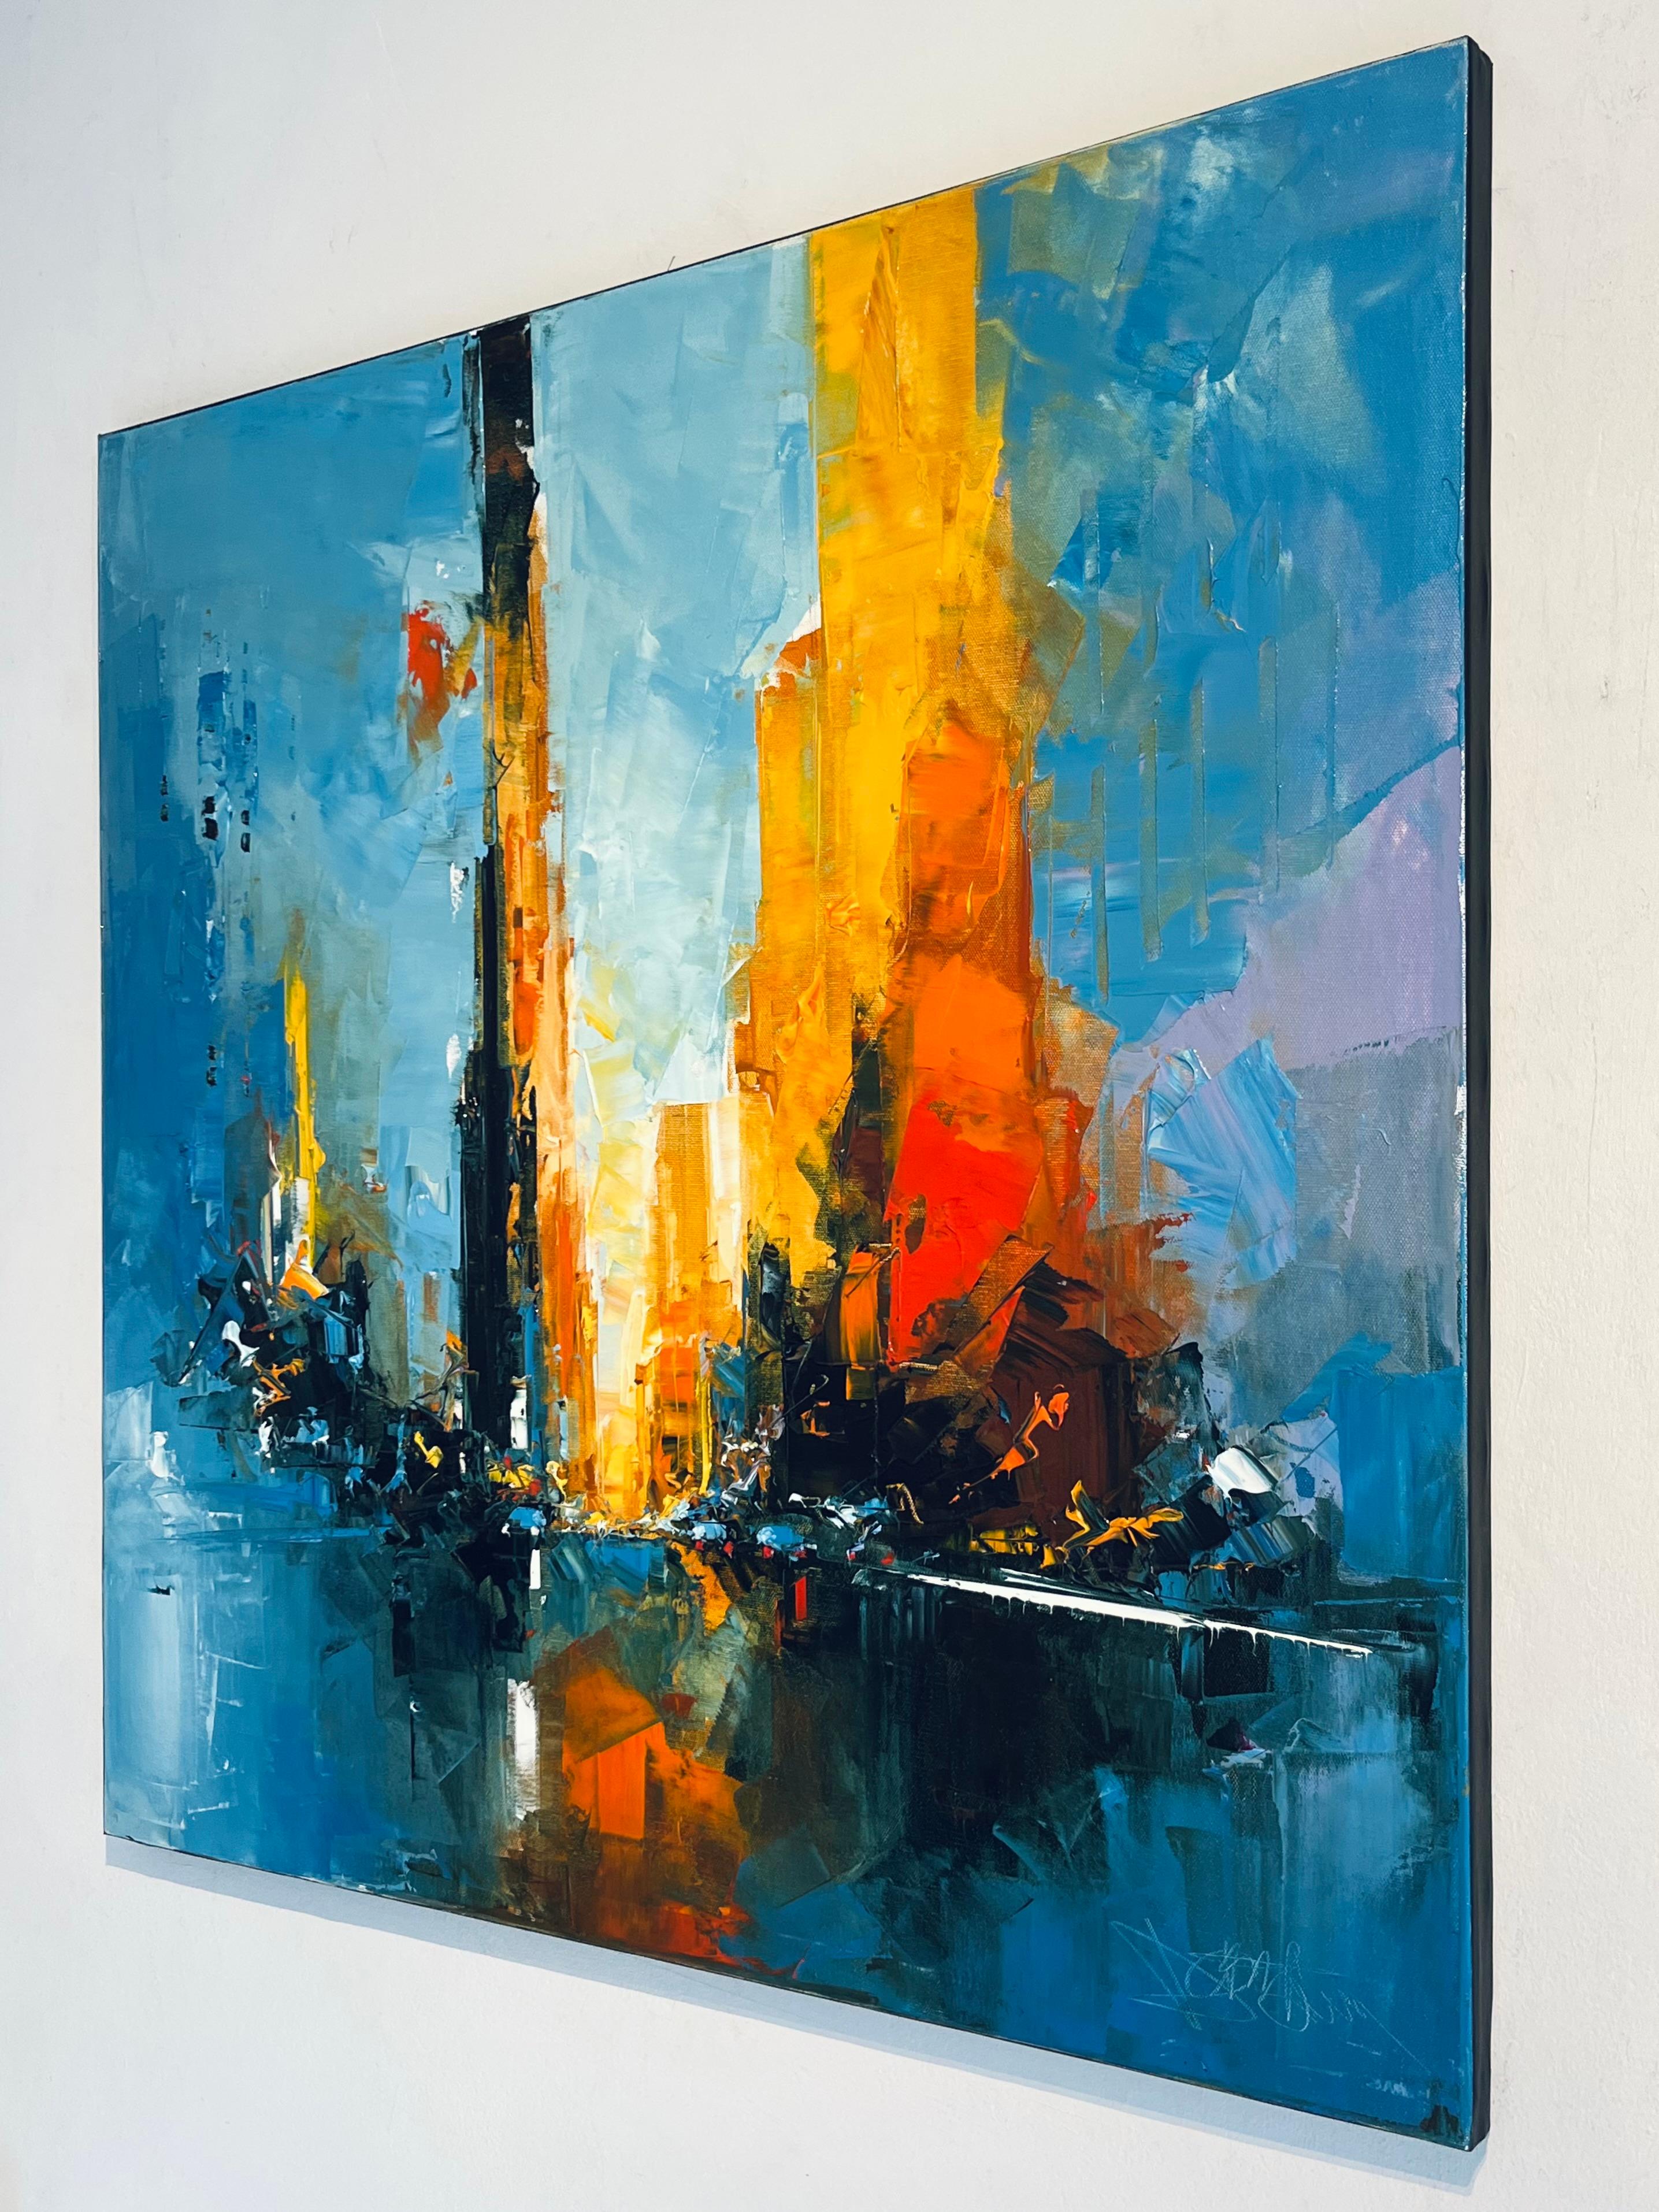 Perspectives, New York-original abstract city landscape artwork-contemporary art - Abstract Painting by Daniel Castan